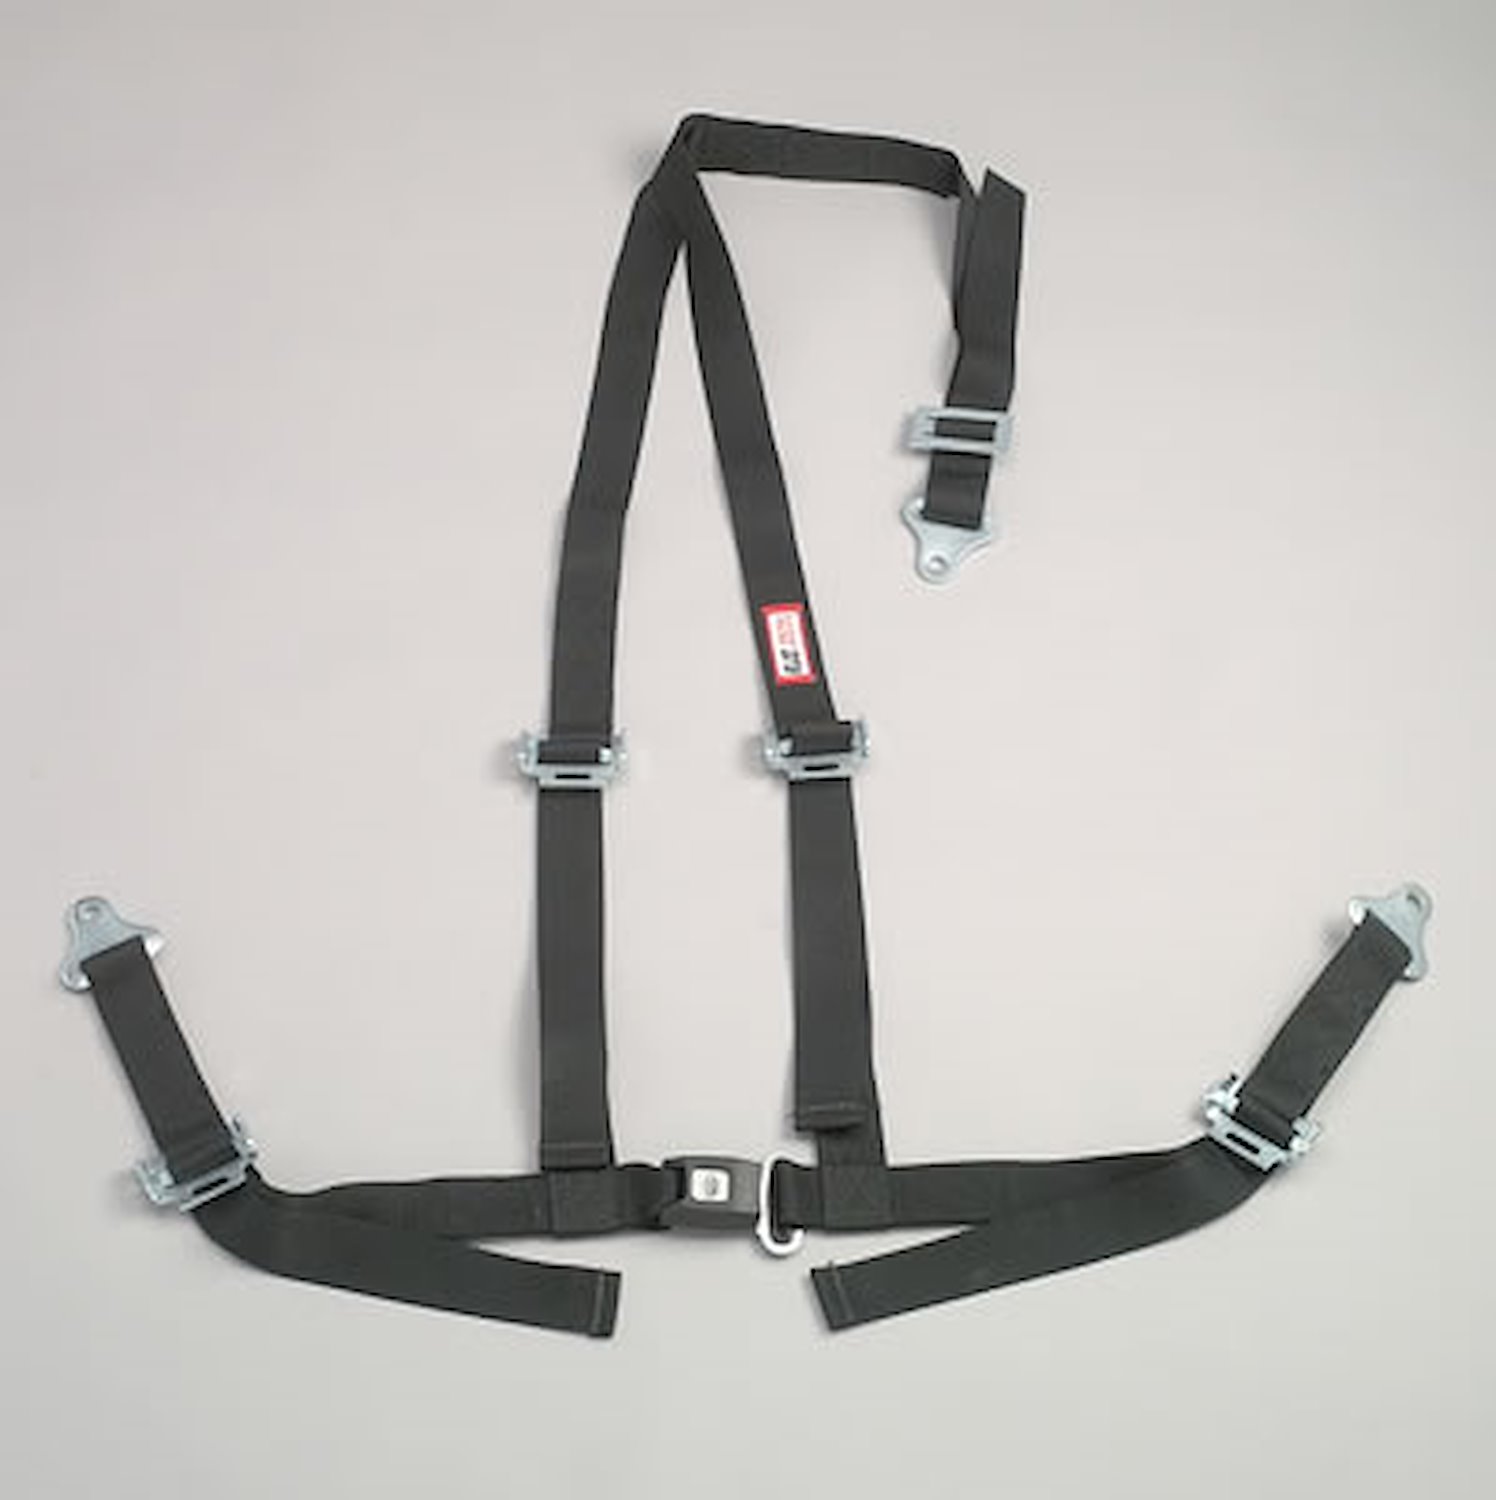 NON-SFI B&T HARNESS 2 PULL UP Lap Belt SNAP 2 S. H. Individual ROLL BAR Mount WRAP/SNAP w/STERNUM STRAP BLACK